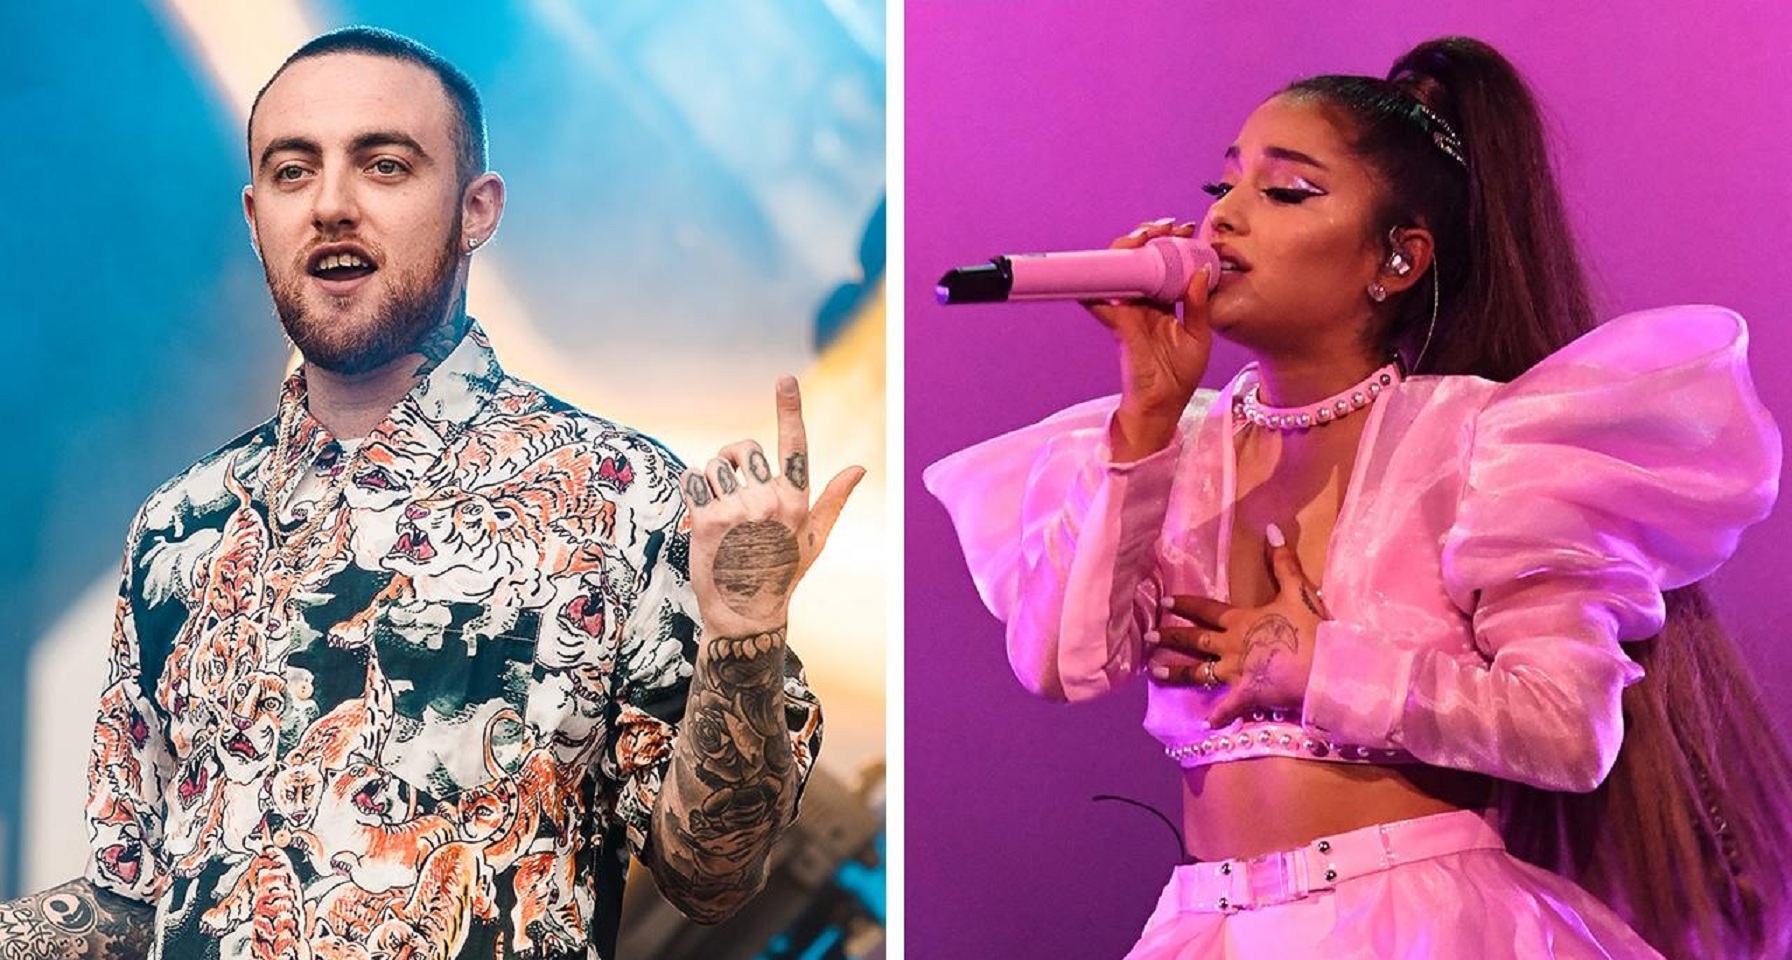 Ariana Grande Chokes Up While Performing ‘Thank You, Next’ in Mac Miller’s Hometown!